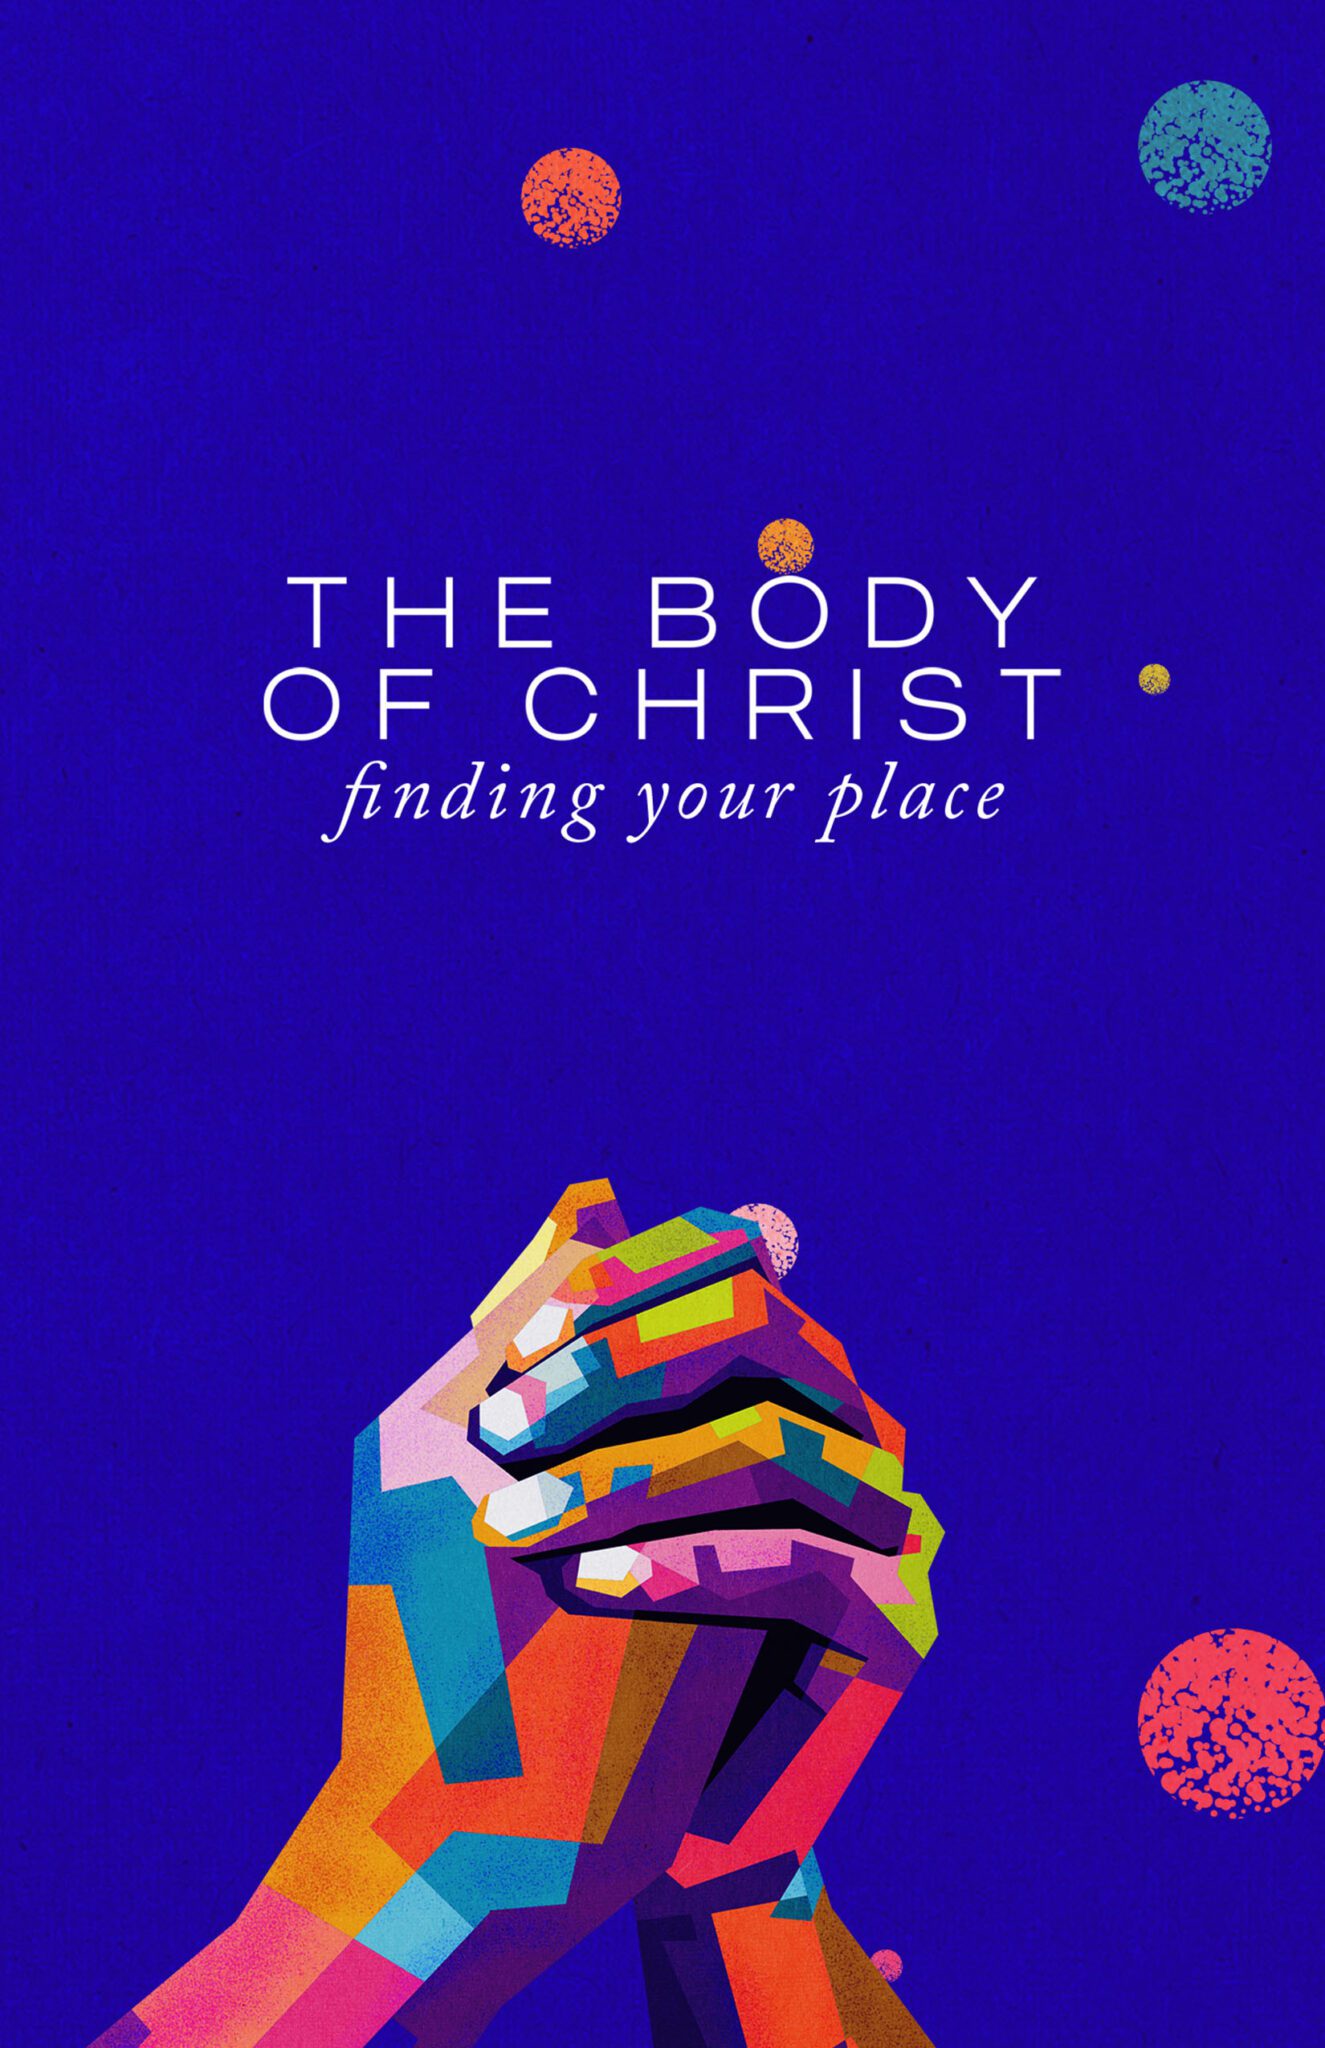 Body Of Christ: Bask in the Source